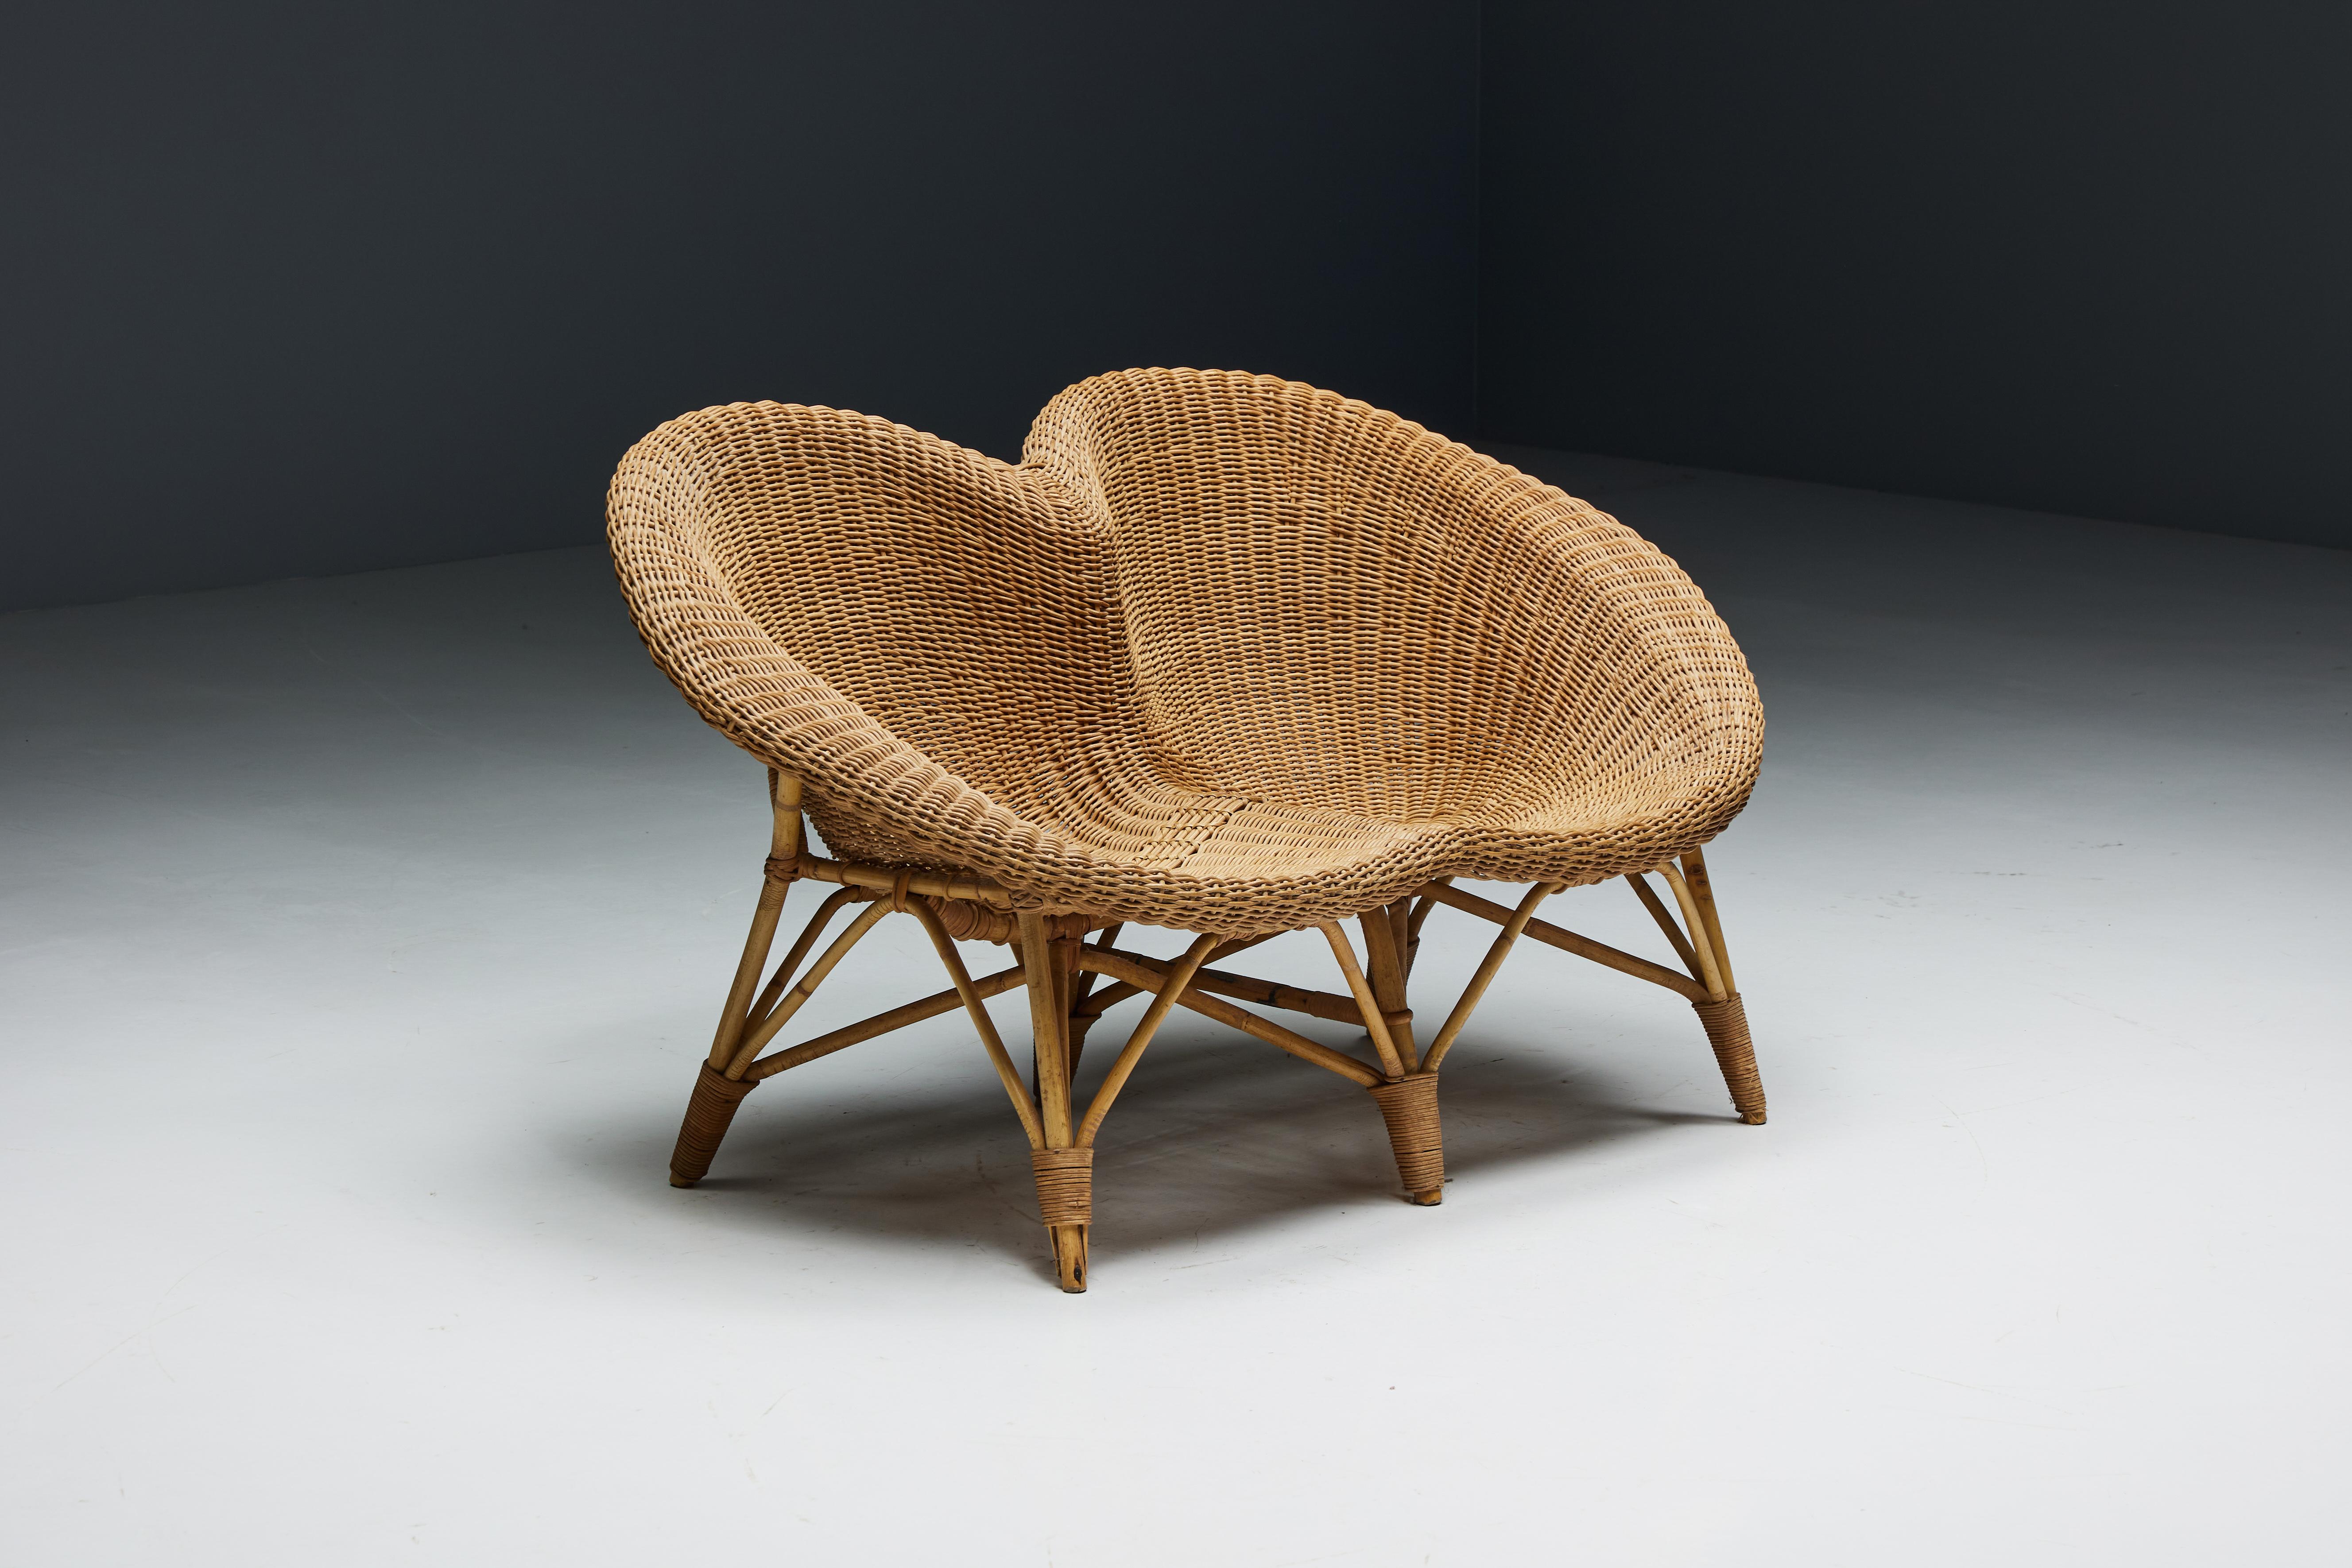 Italian loveseat from 1970, made of a wicker seat and sturdy rattan frame and legs. The unique design consists of two cone-shaped chairs that blend seamlessly, creating a visually captivating focal point for any room.